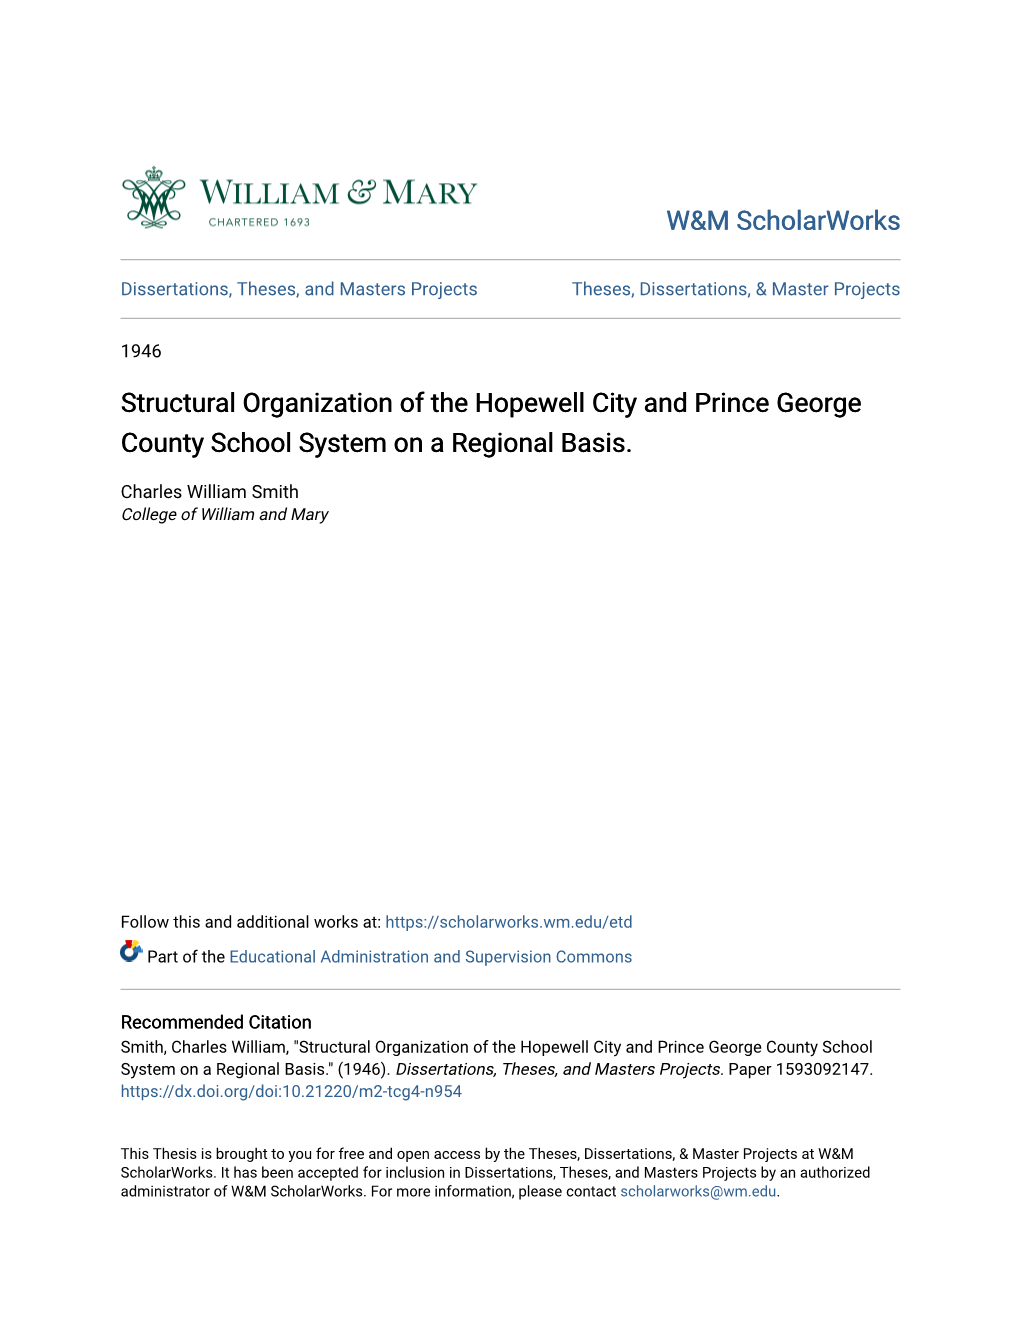 Structural Organization of the Hopewell City and Prince George County School System on a Regional Basis